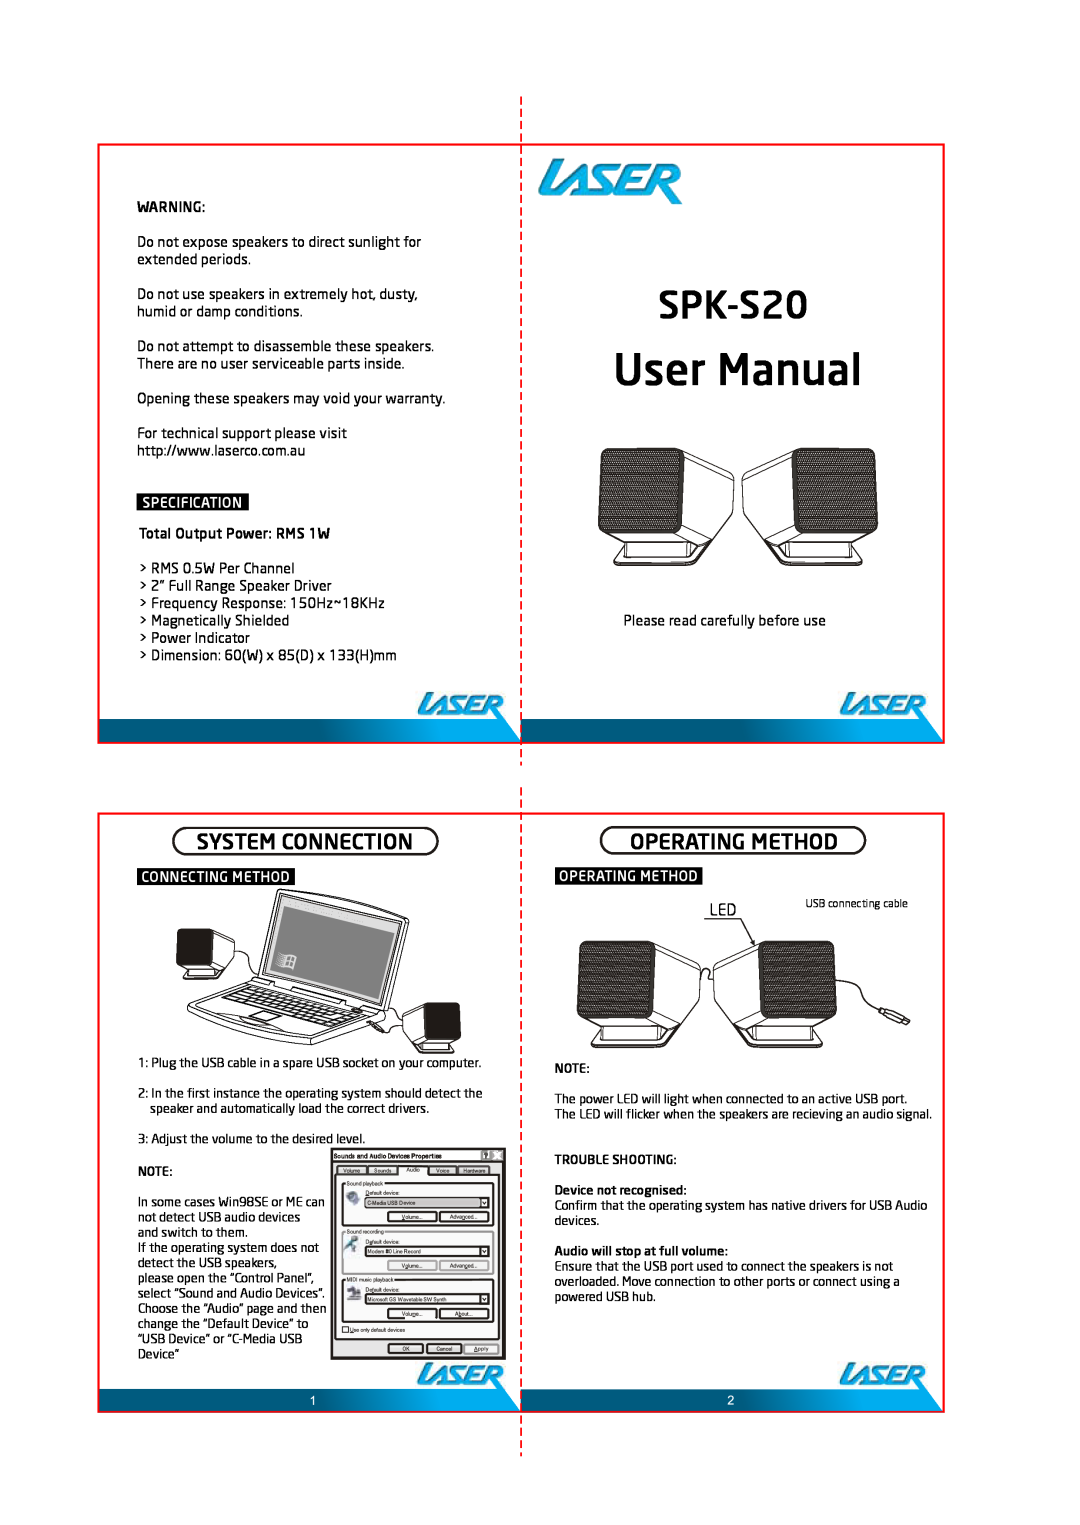 Laser SPK-S20 user manual User Manual, System Connection, Operating Method, Opening these speakers may void your warranty 